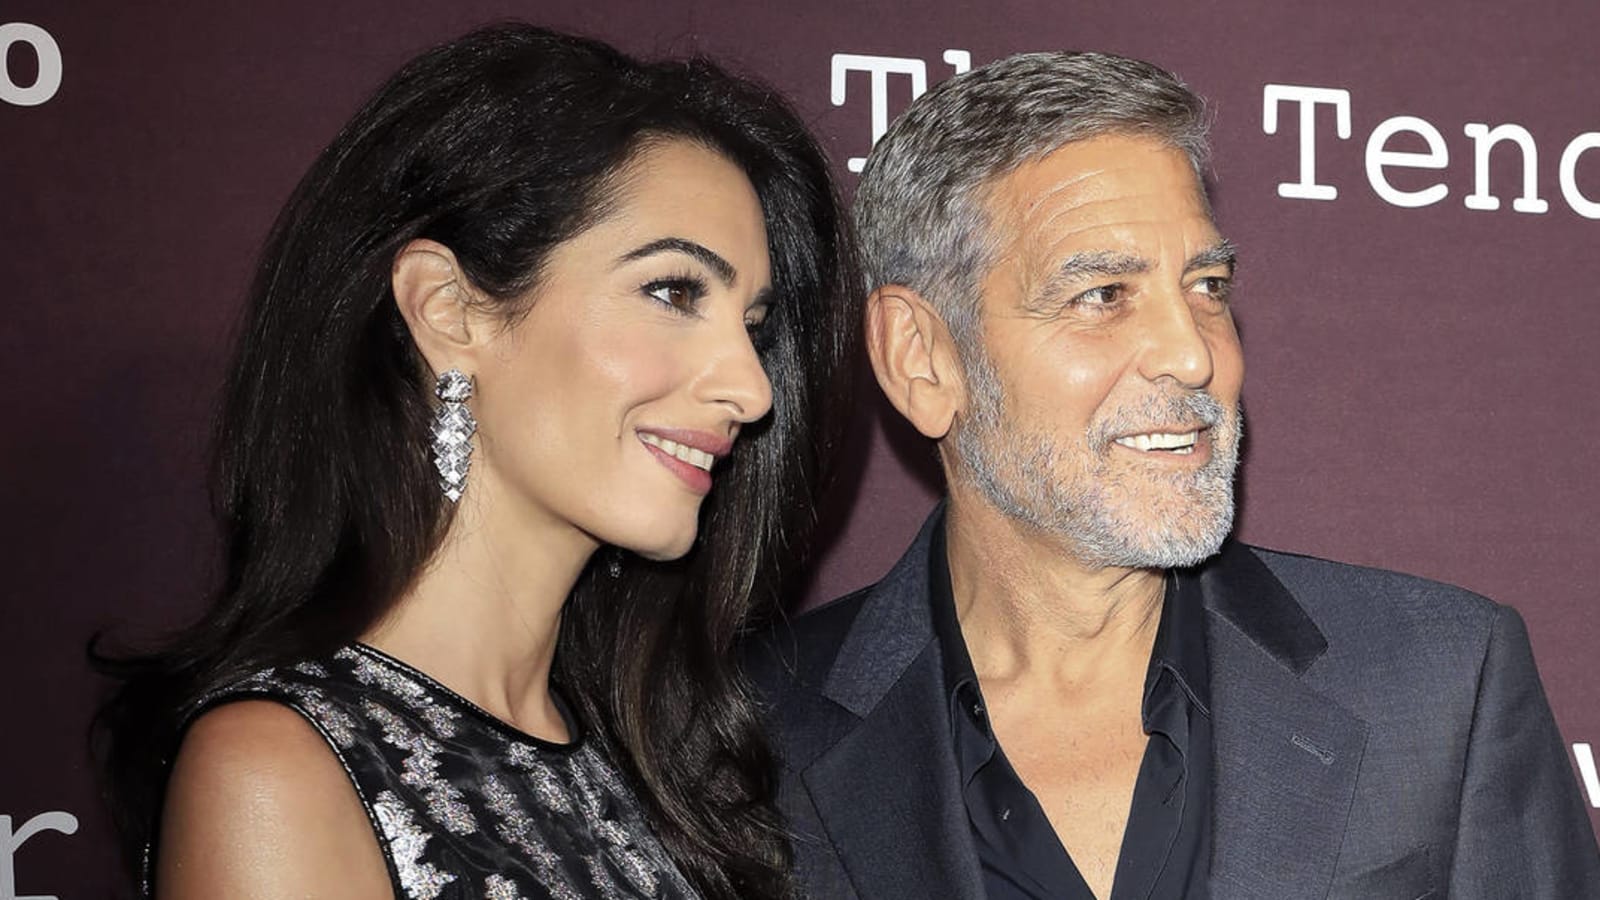 George Clooney remembers Donald Trump as 'this knucklehead' interested in 'chasing girls'